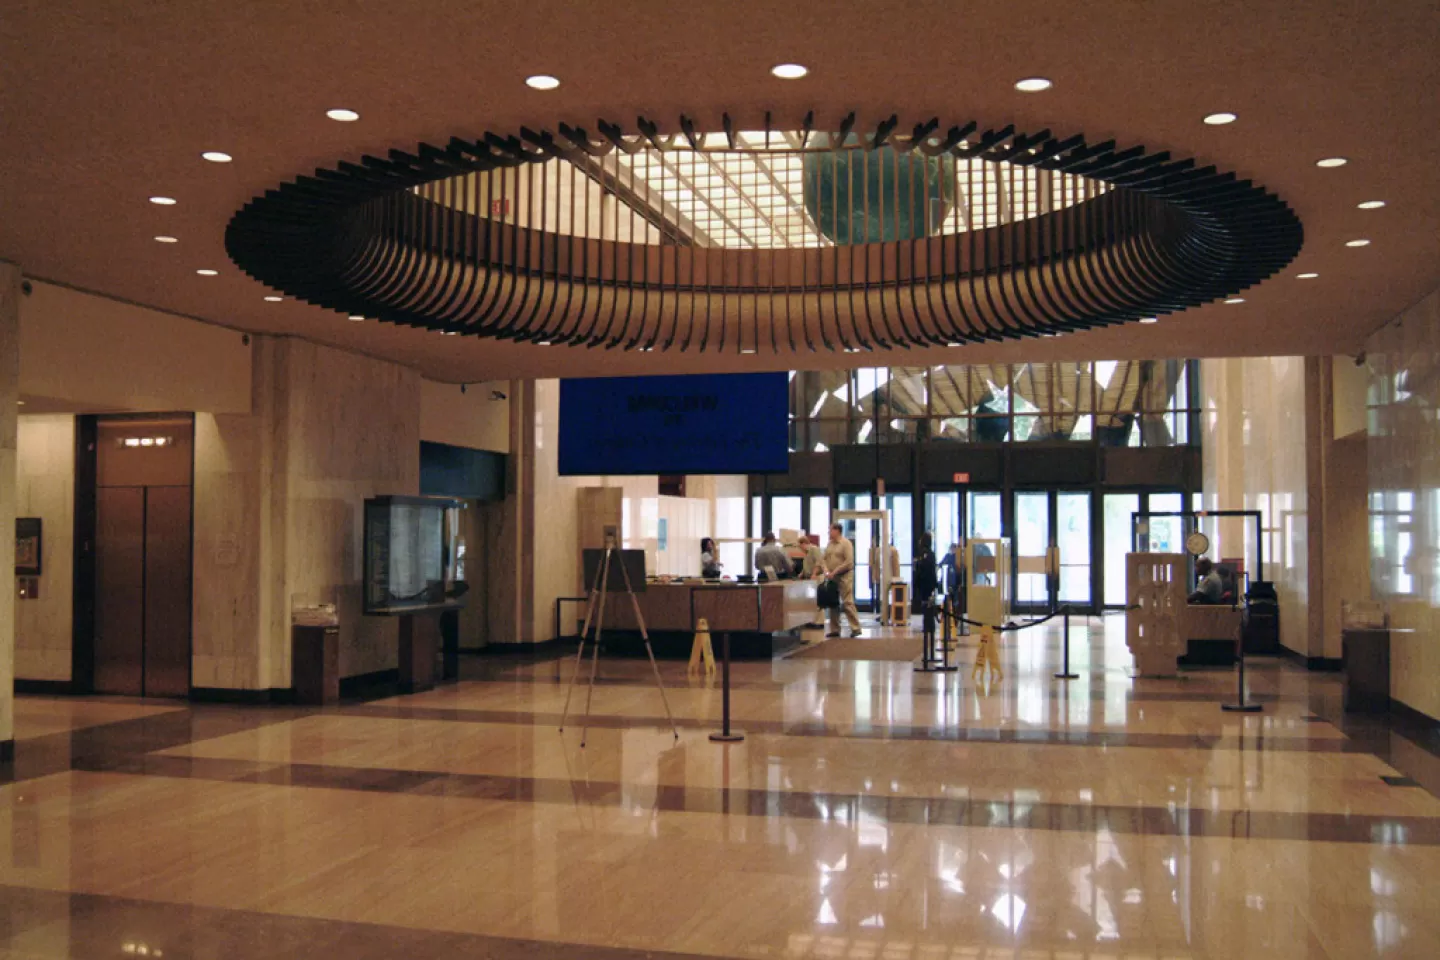 Interior view of the James Madison Building.